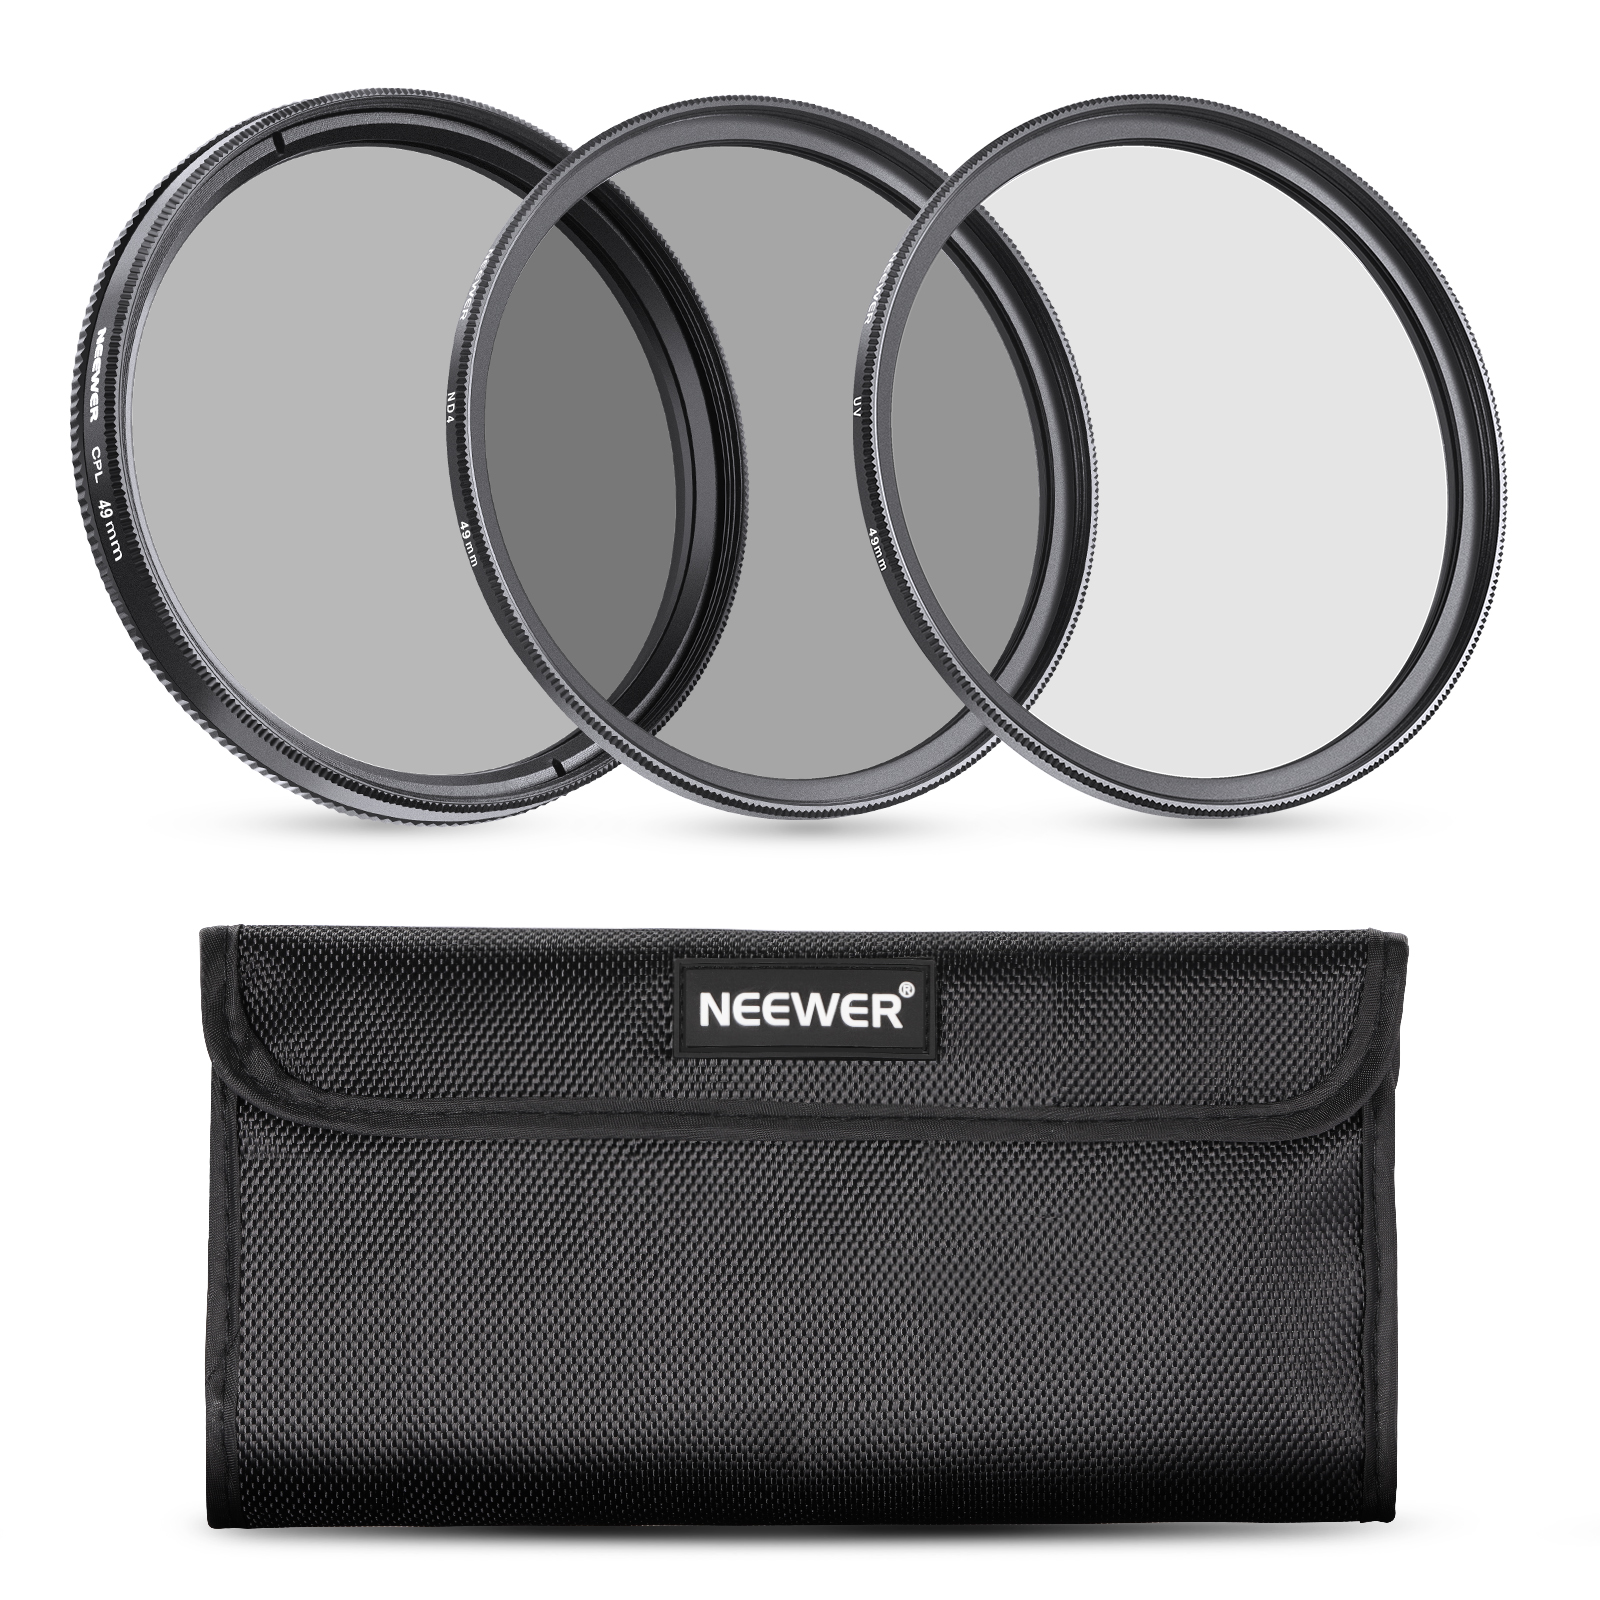 neewer 49mm lens filter kit uv cpl nd4 with filter Neewer 72mm